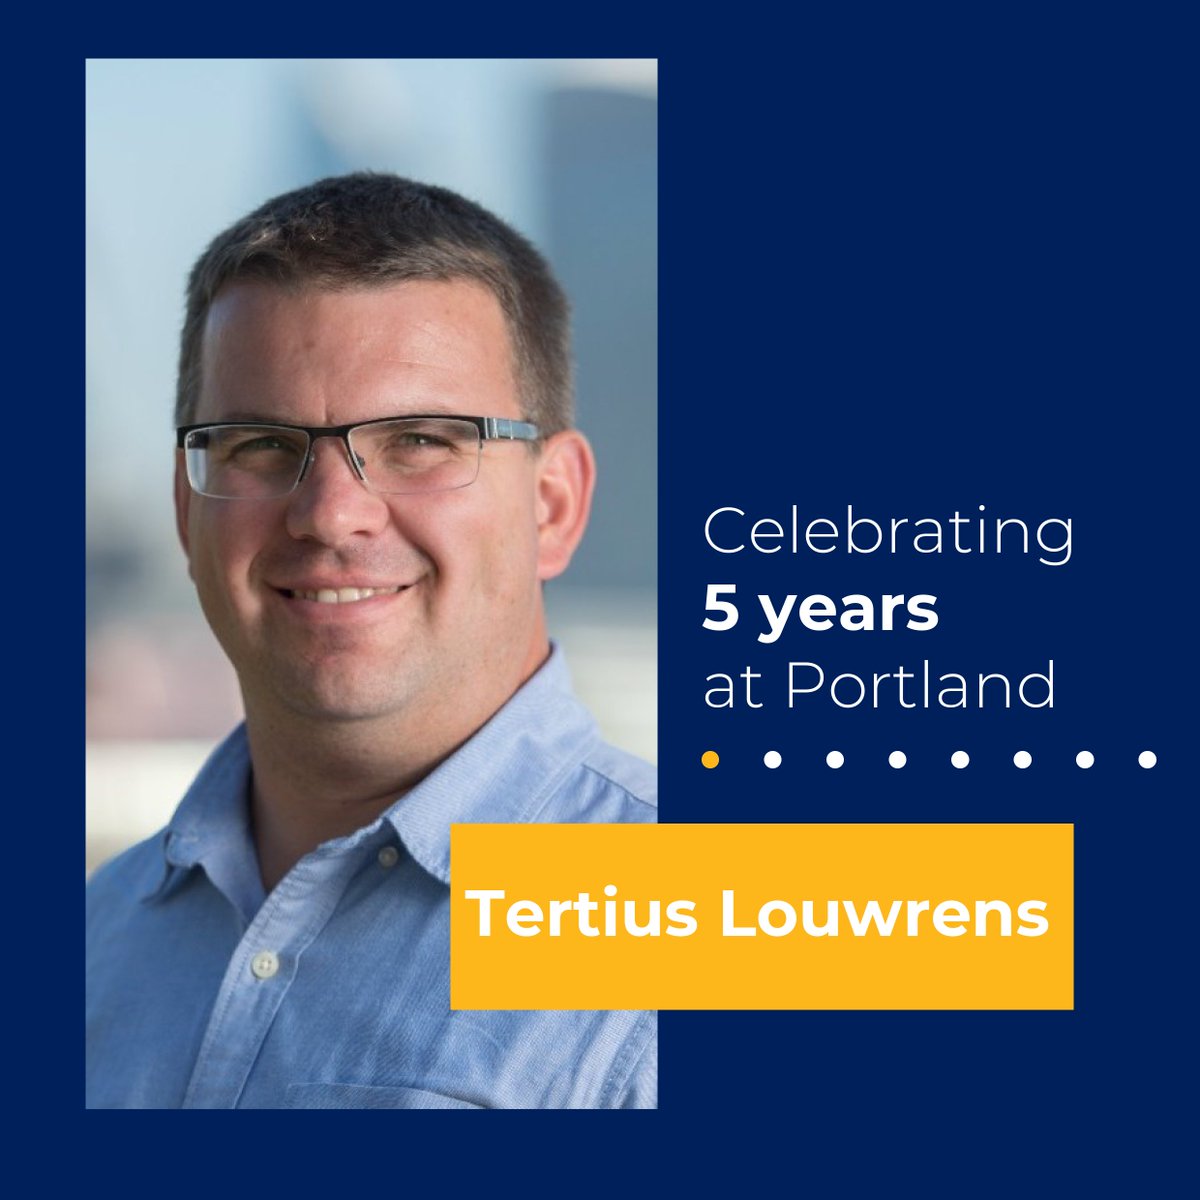 Congratulations to Tertius Louwrens on his 5-year anniversary at Portland🎉. On his role as Finance Director, Tertius says: 'We learn and grow in the moments where we are pushed to the boundaries of what we believe we are capable of. This has been my Portland story, of being…